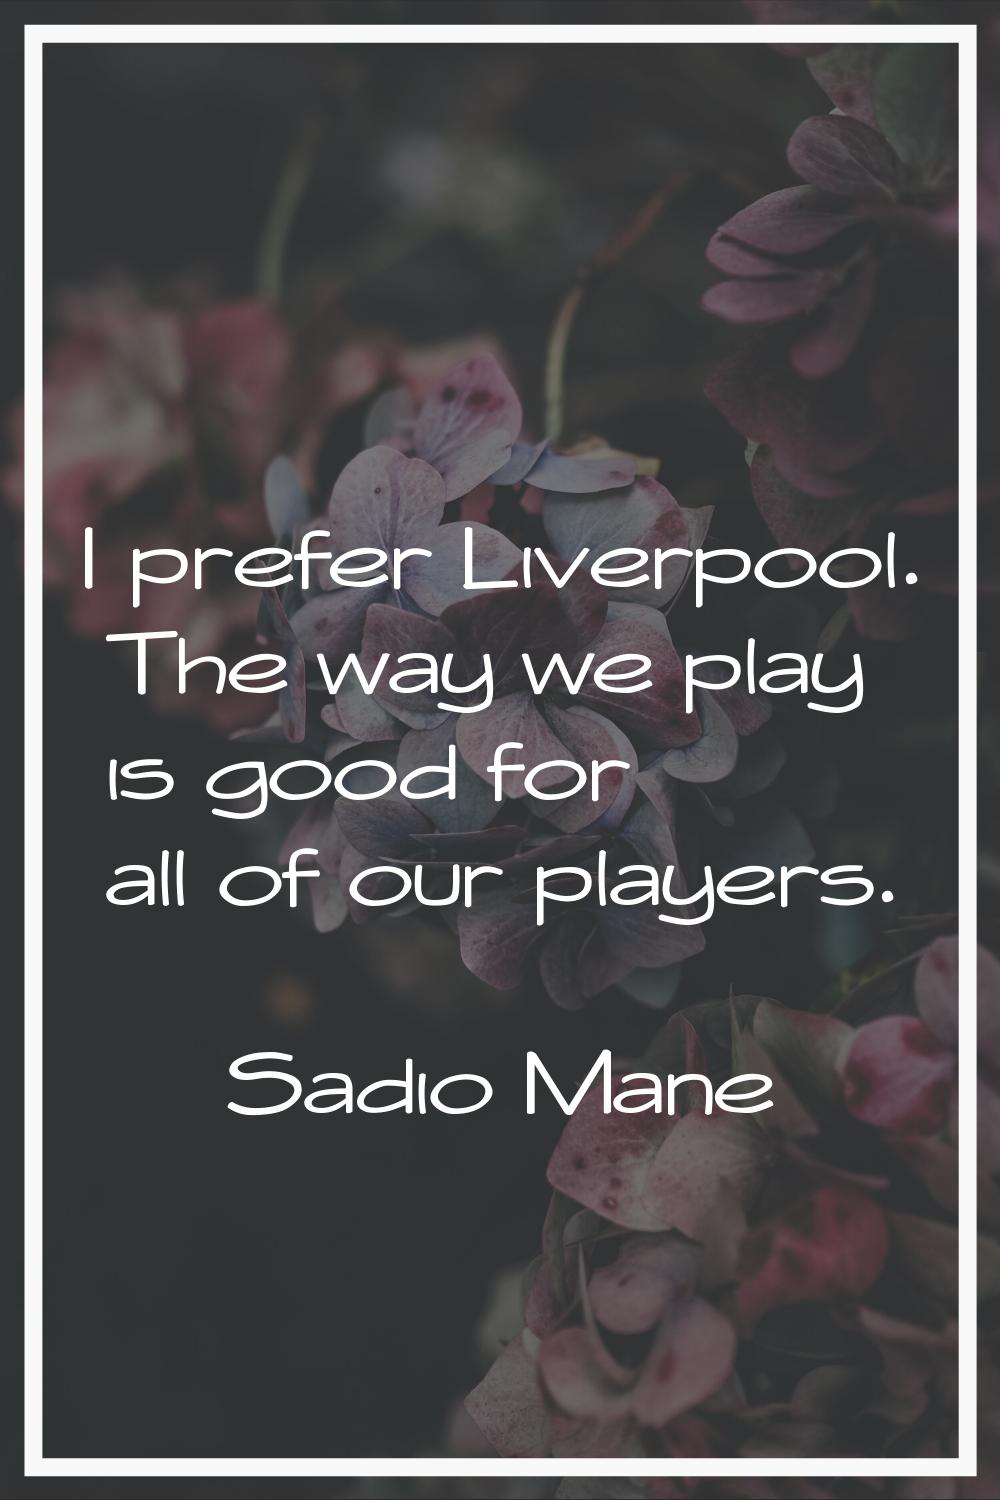 I prefer Liverpool. The way we play is good for all of our players.